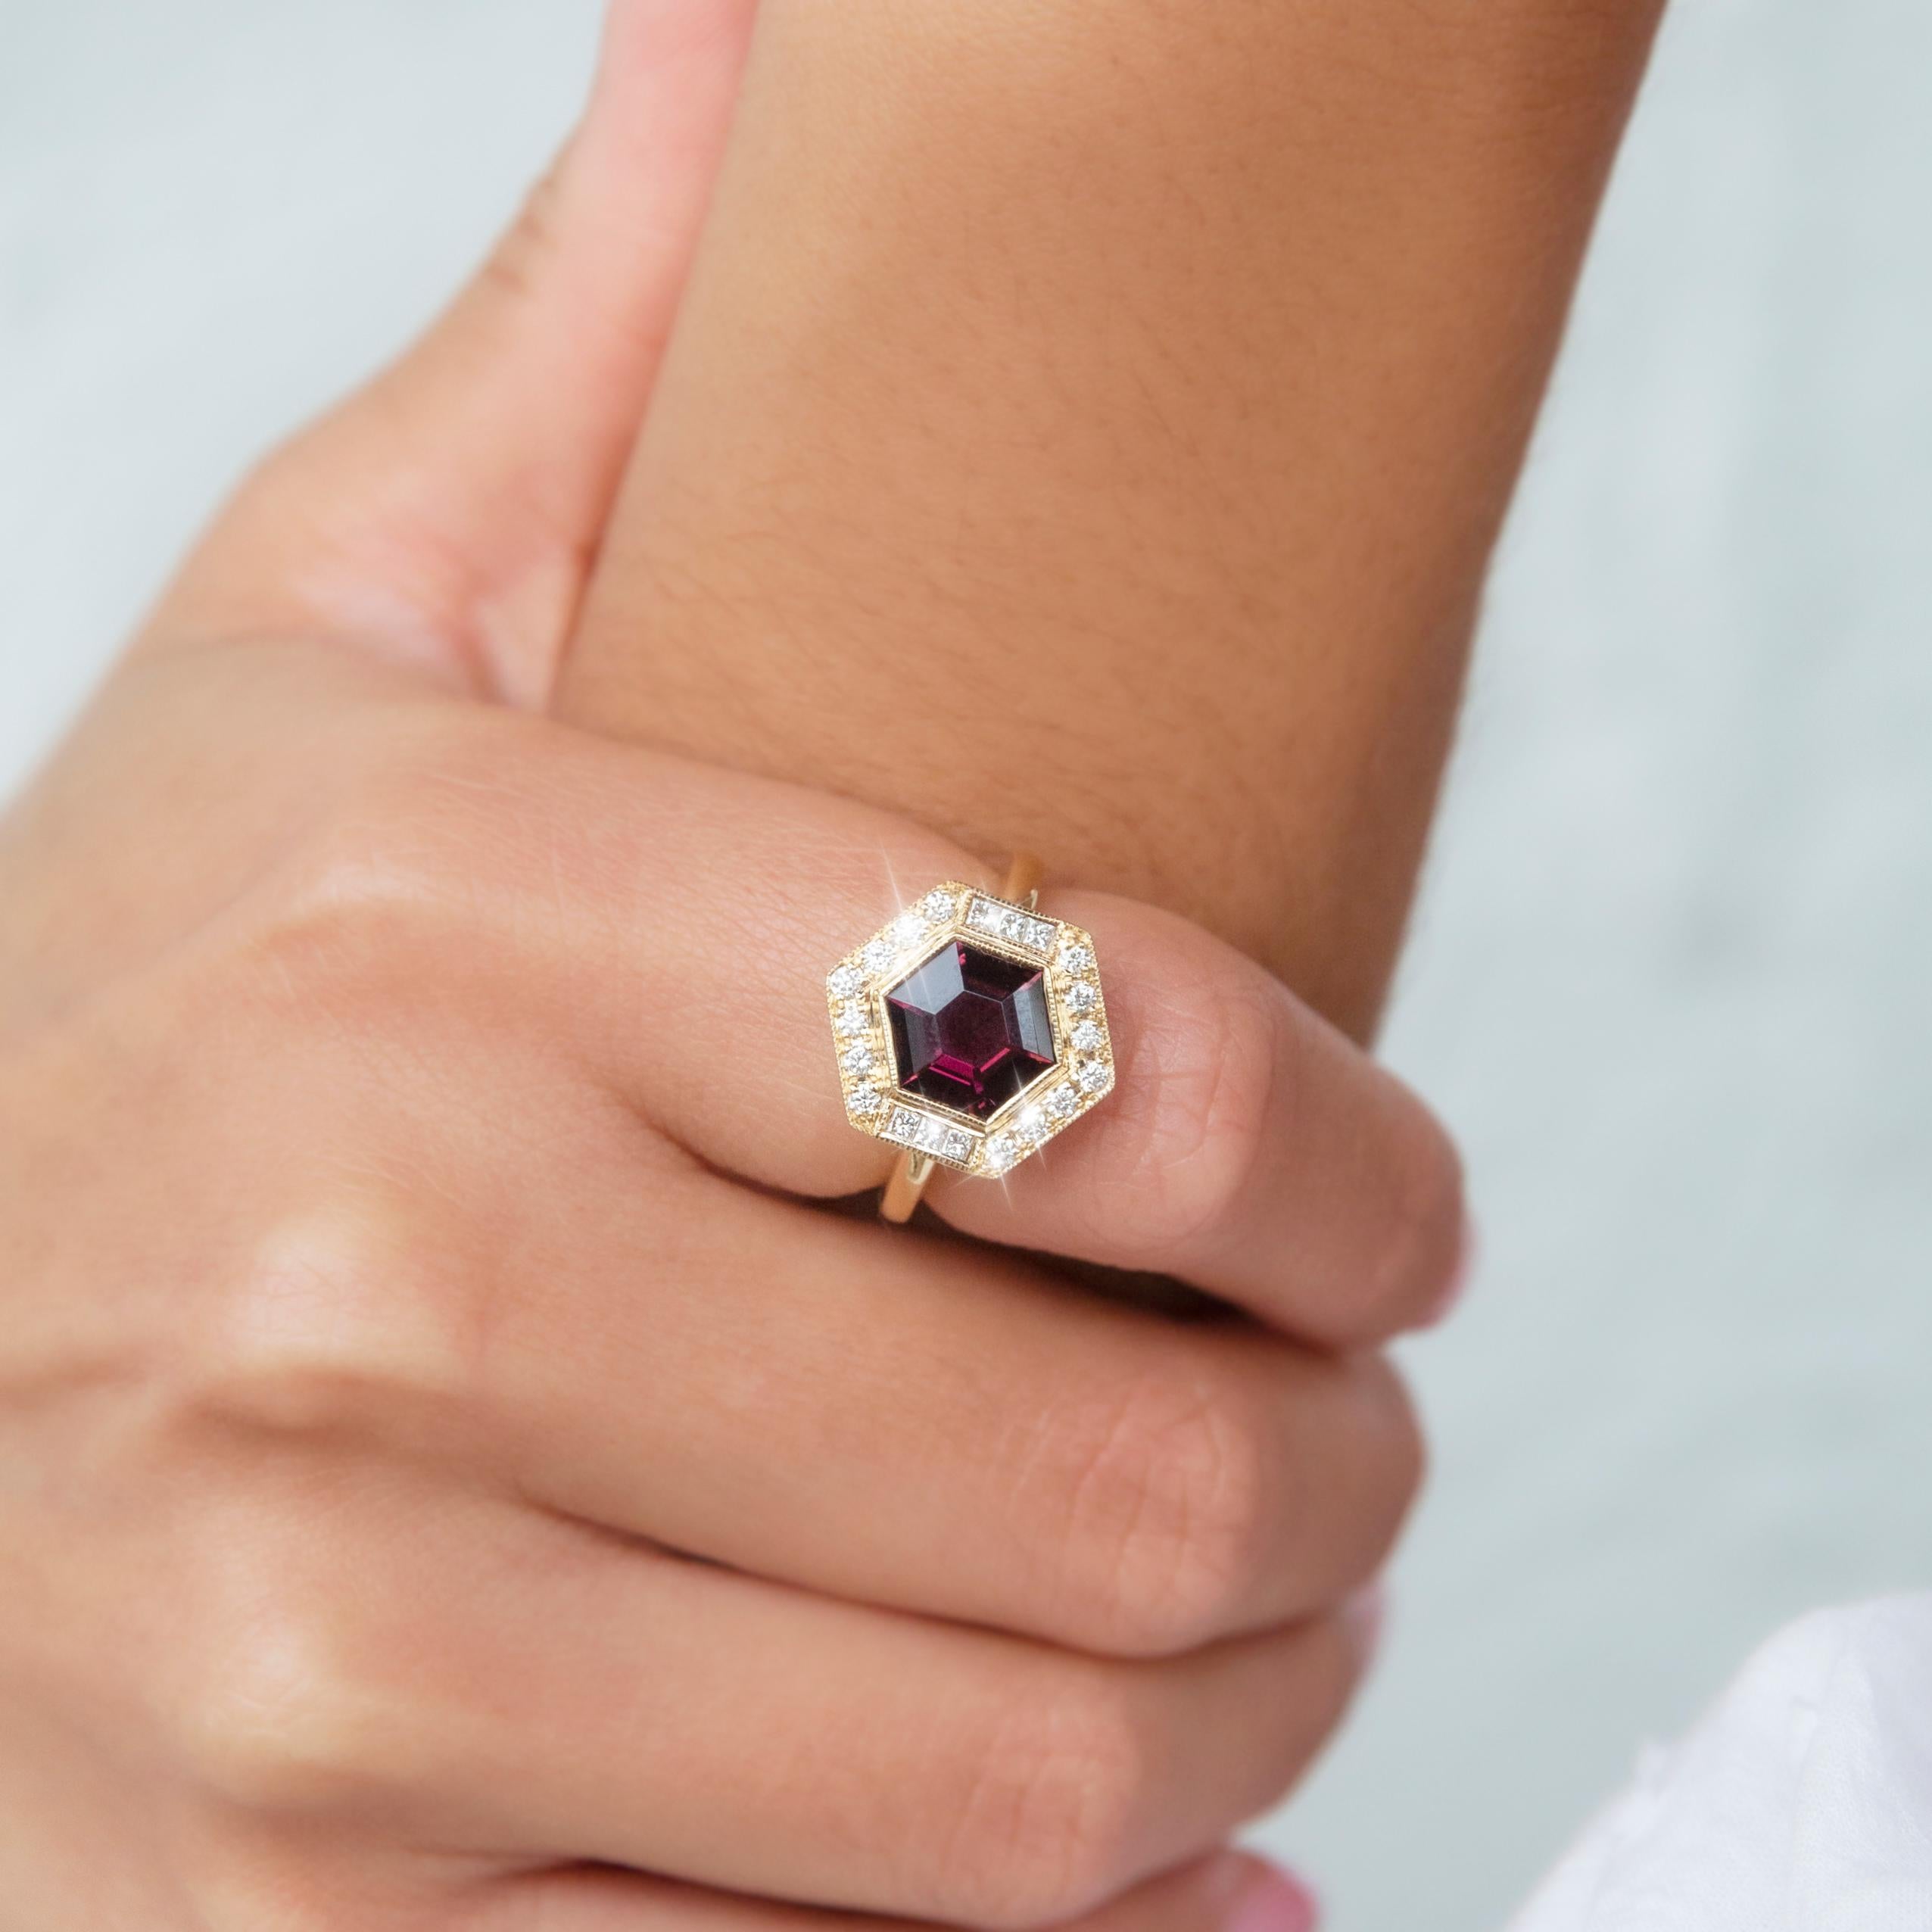 Thoughtfully crafted in 18 carat yellow gold, this wonderful contemporary ring features a darling Reddish-purple hexagonal cut tourmaline at the centre of a graceful basket setting with a glistening border of bead set round brilliant and princess